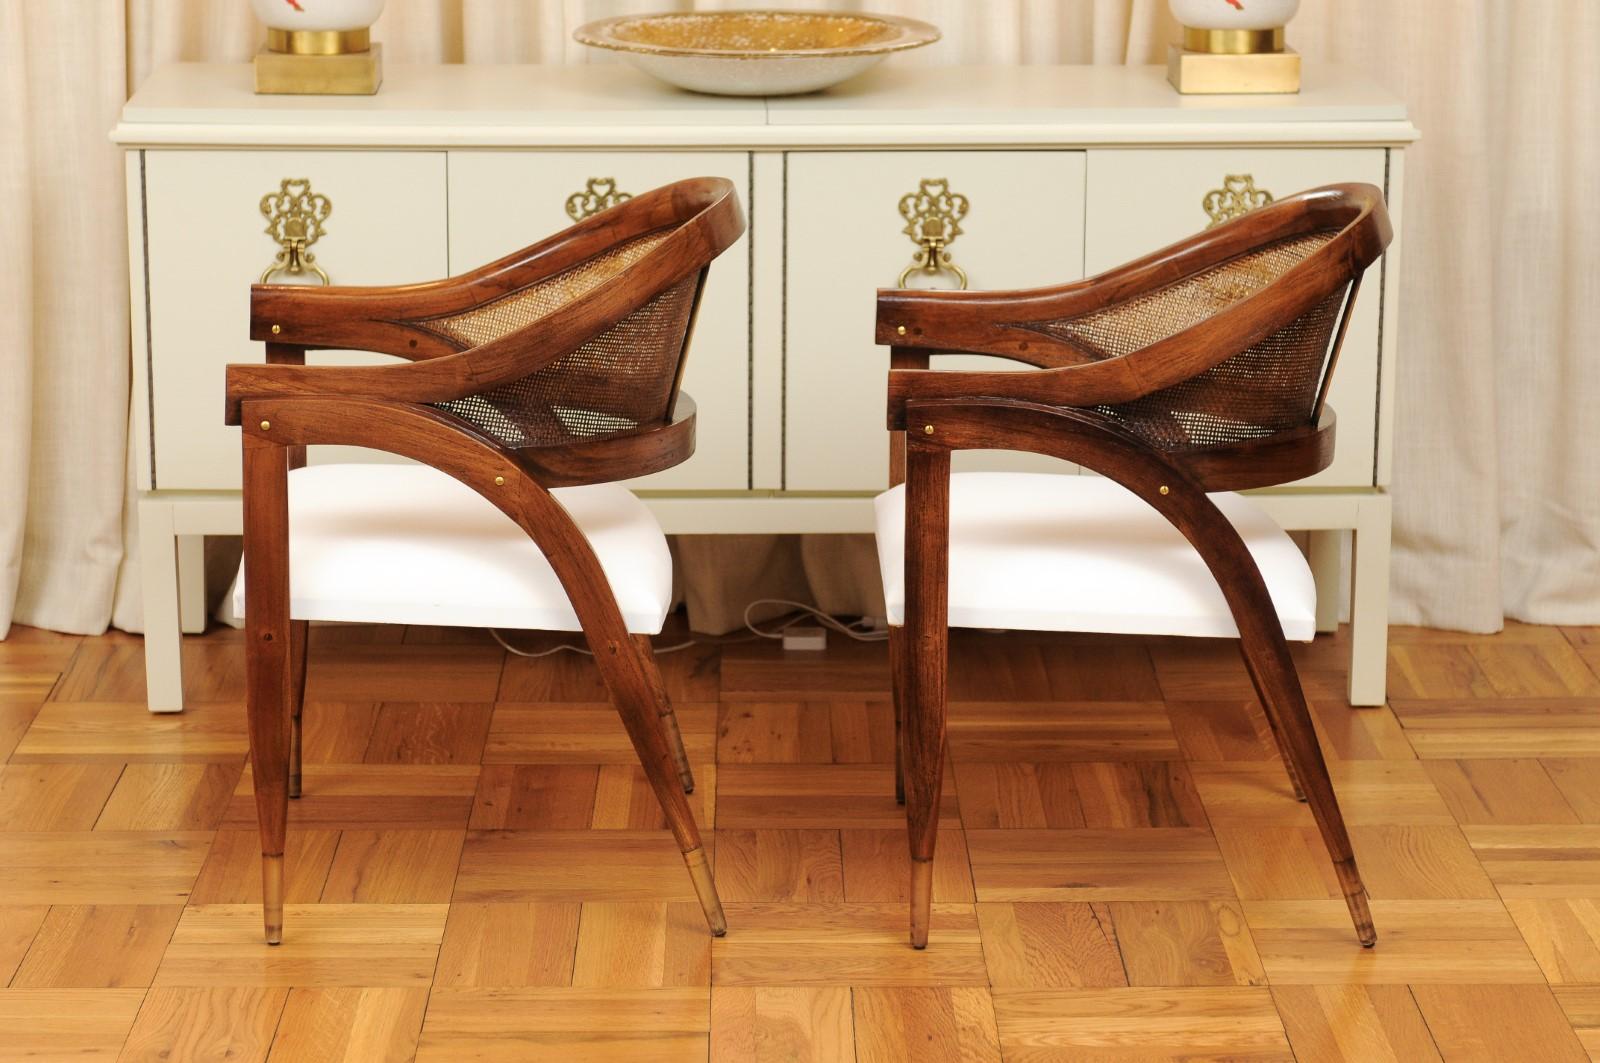 Stunning Restored Pair of Custom Teak and Cane Captains Chairs For Sale 4